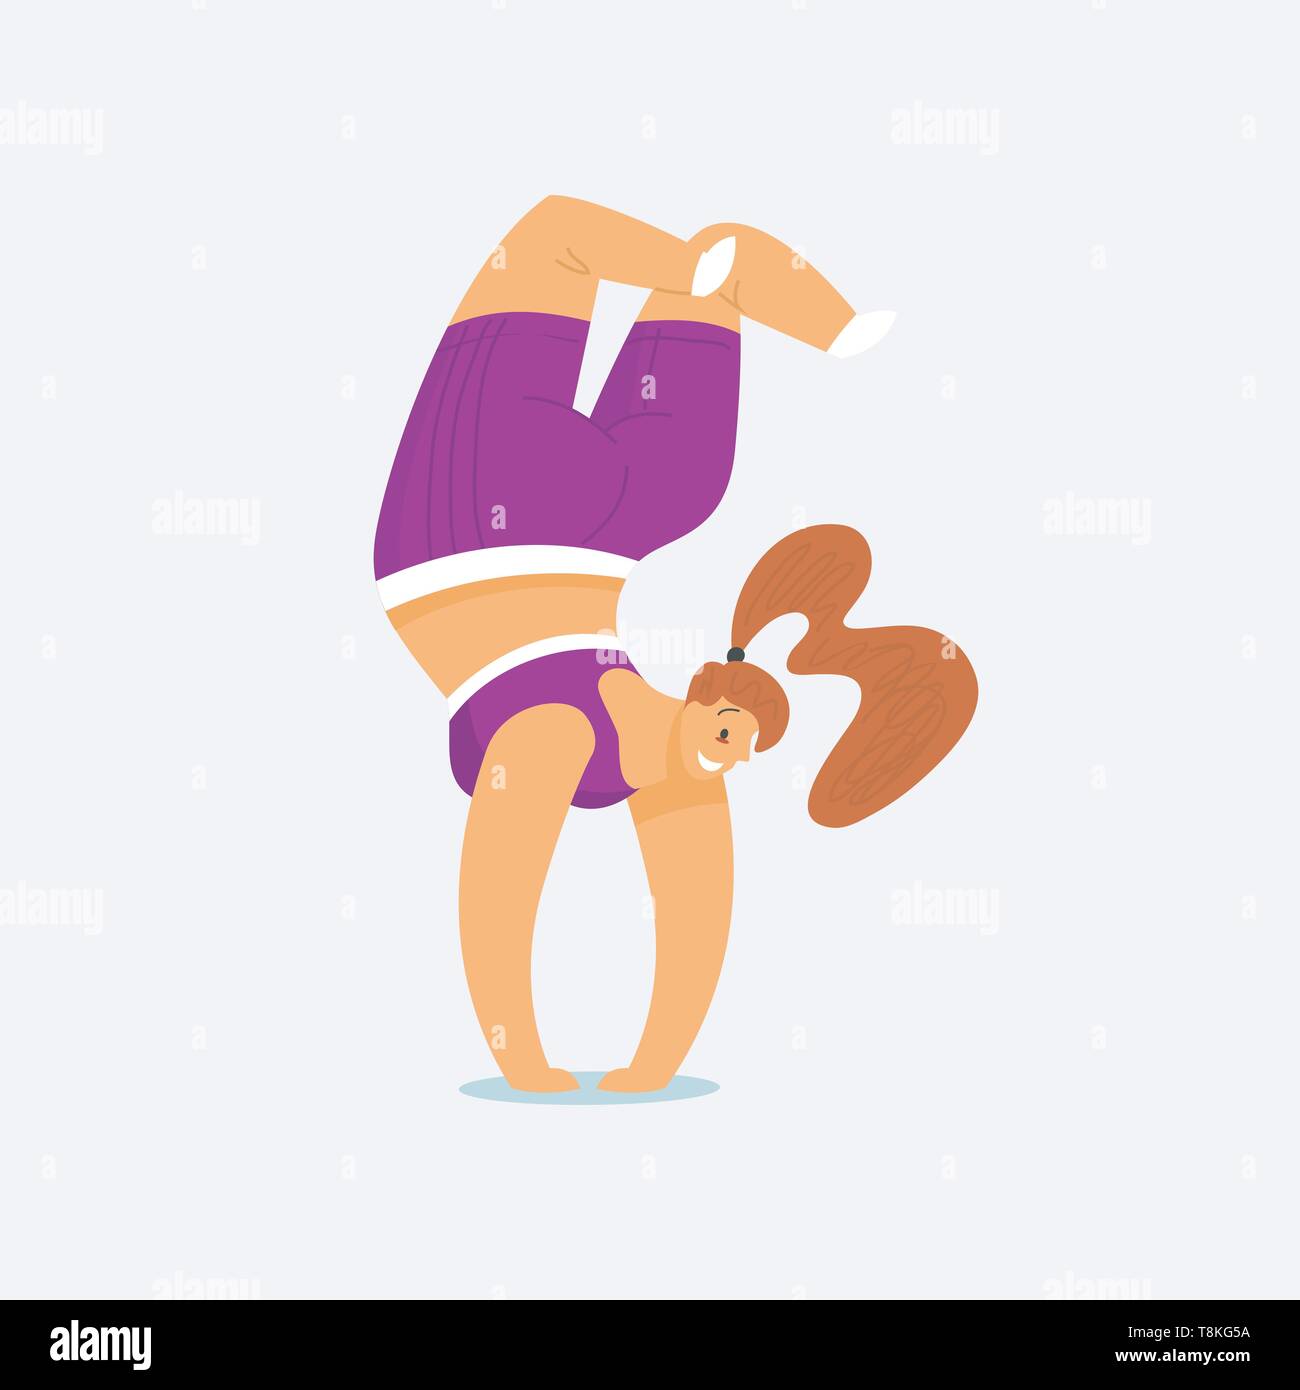 Gymnast Girl Plus Size. Health sport in club. Fat fitness Woman doing exercises, weight loss, warming up. Training pose in yoga classes, Cute female. Stock Vector